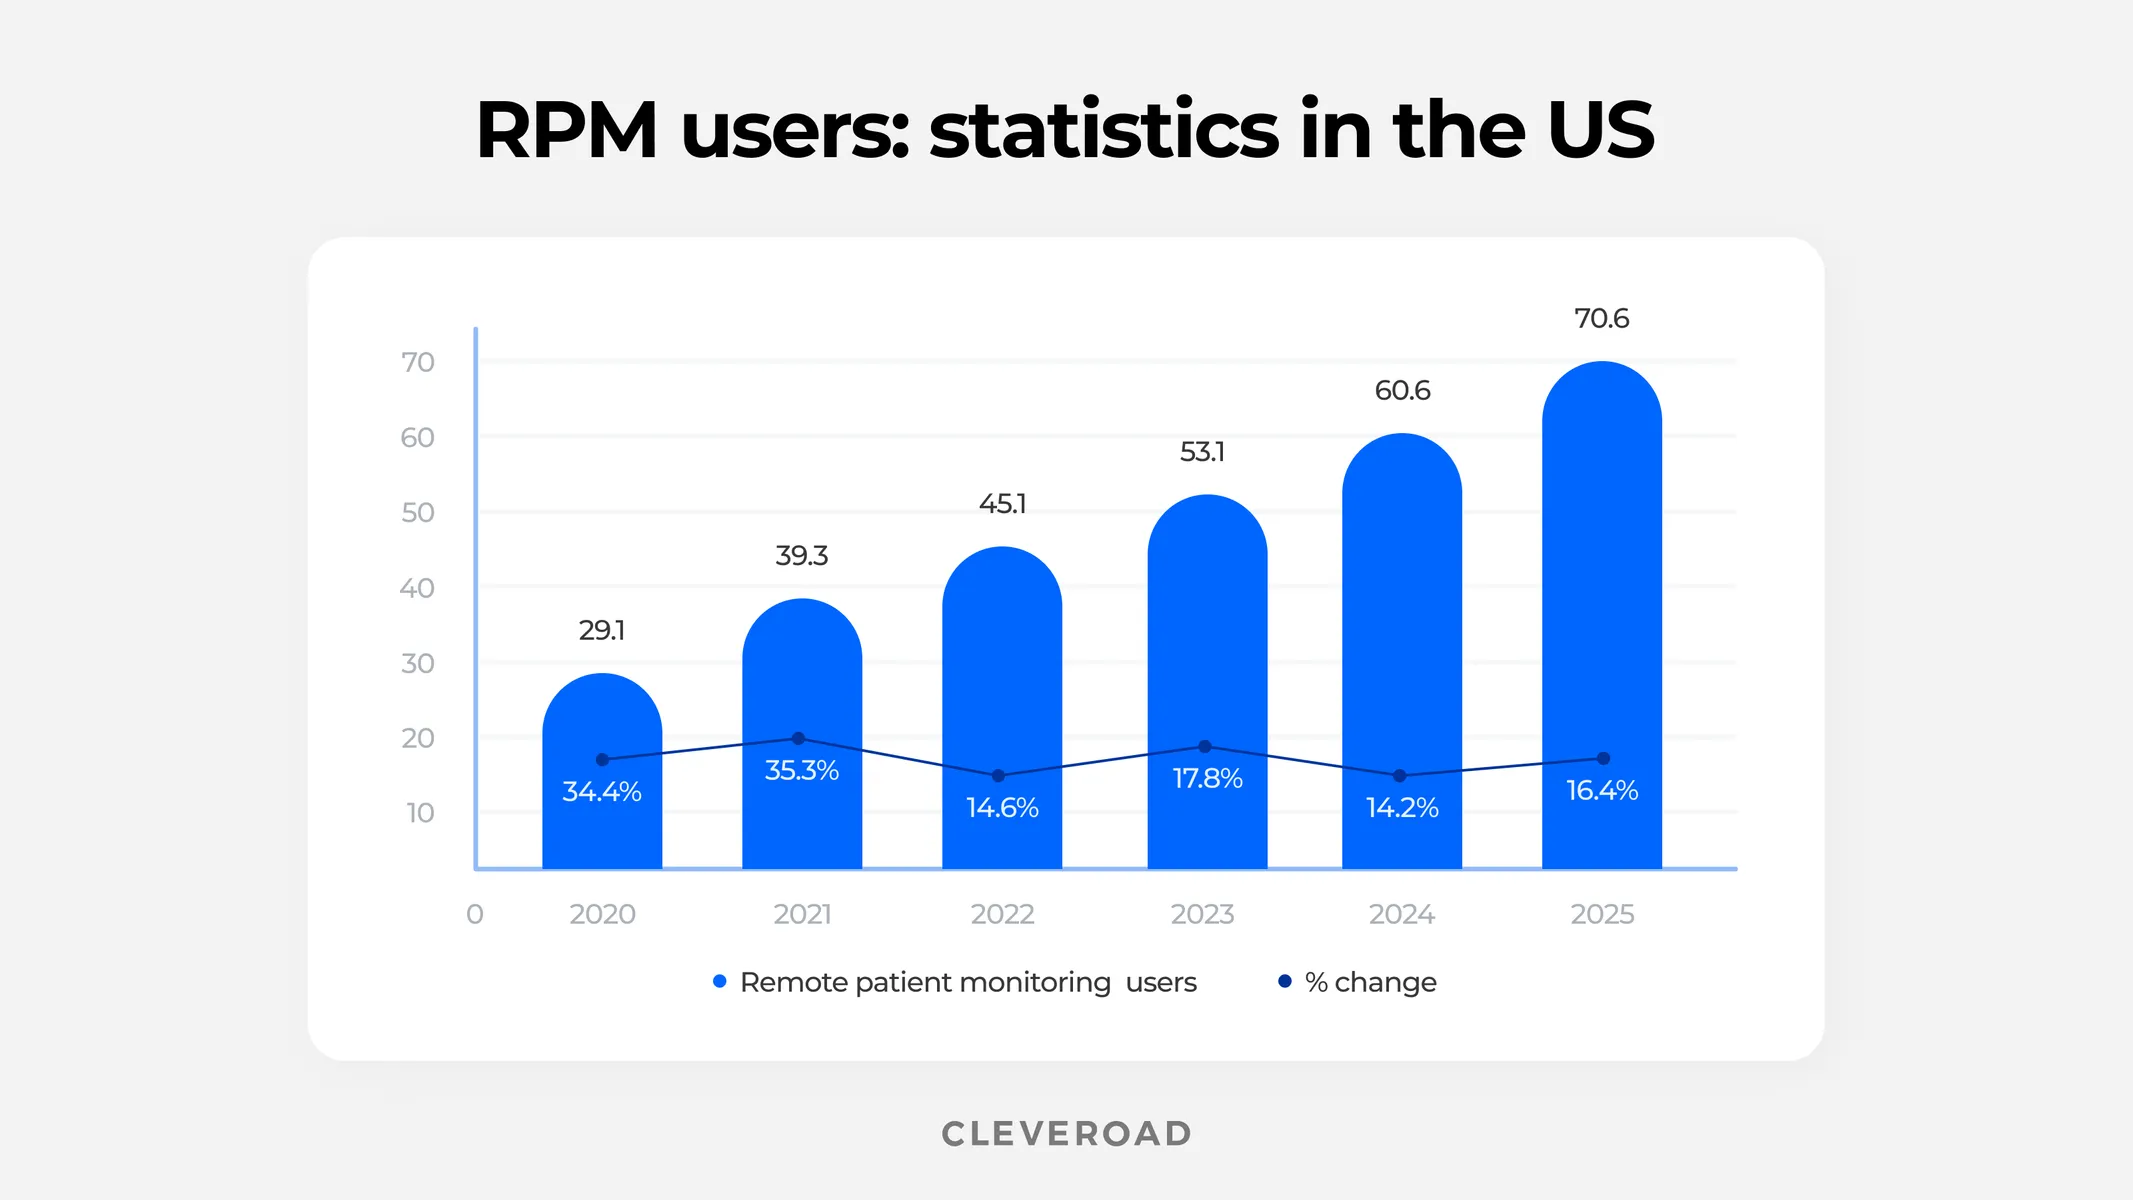 Remote patient monitoring users in the US number